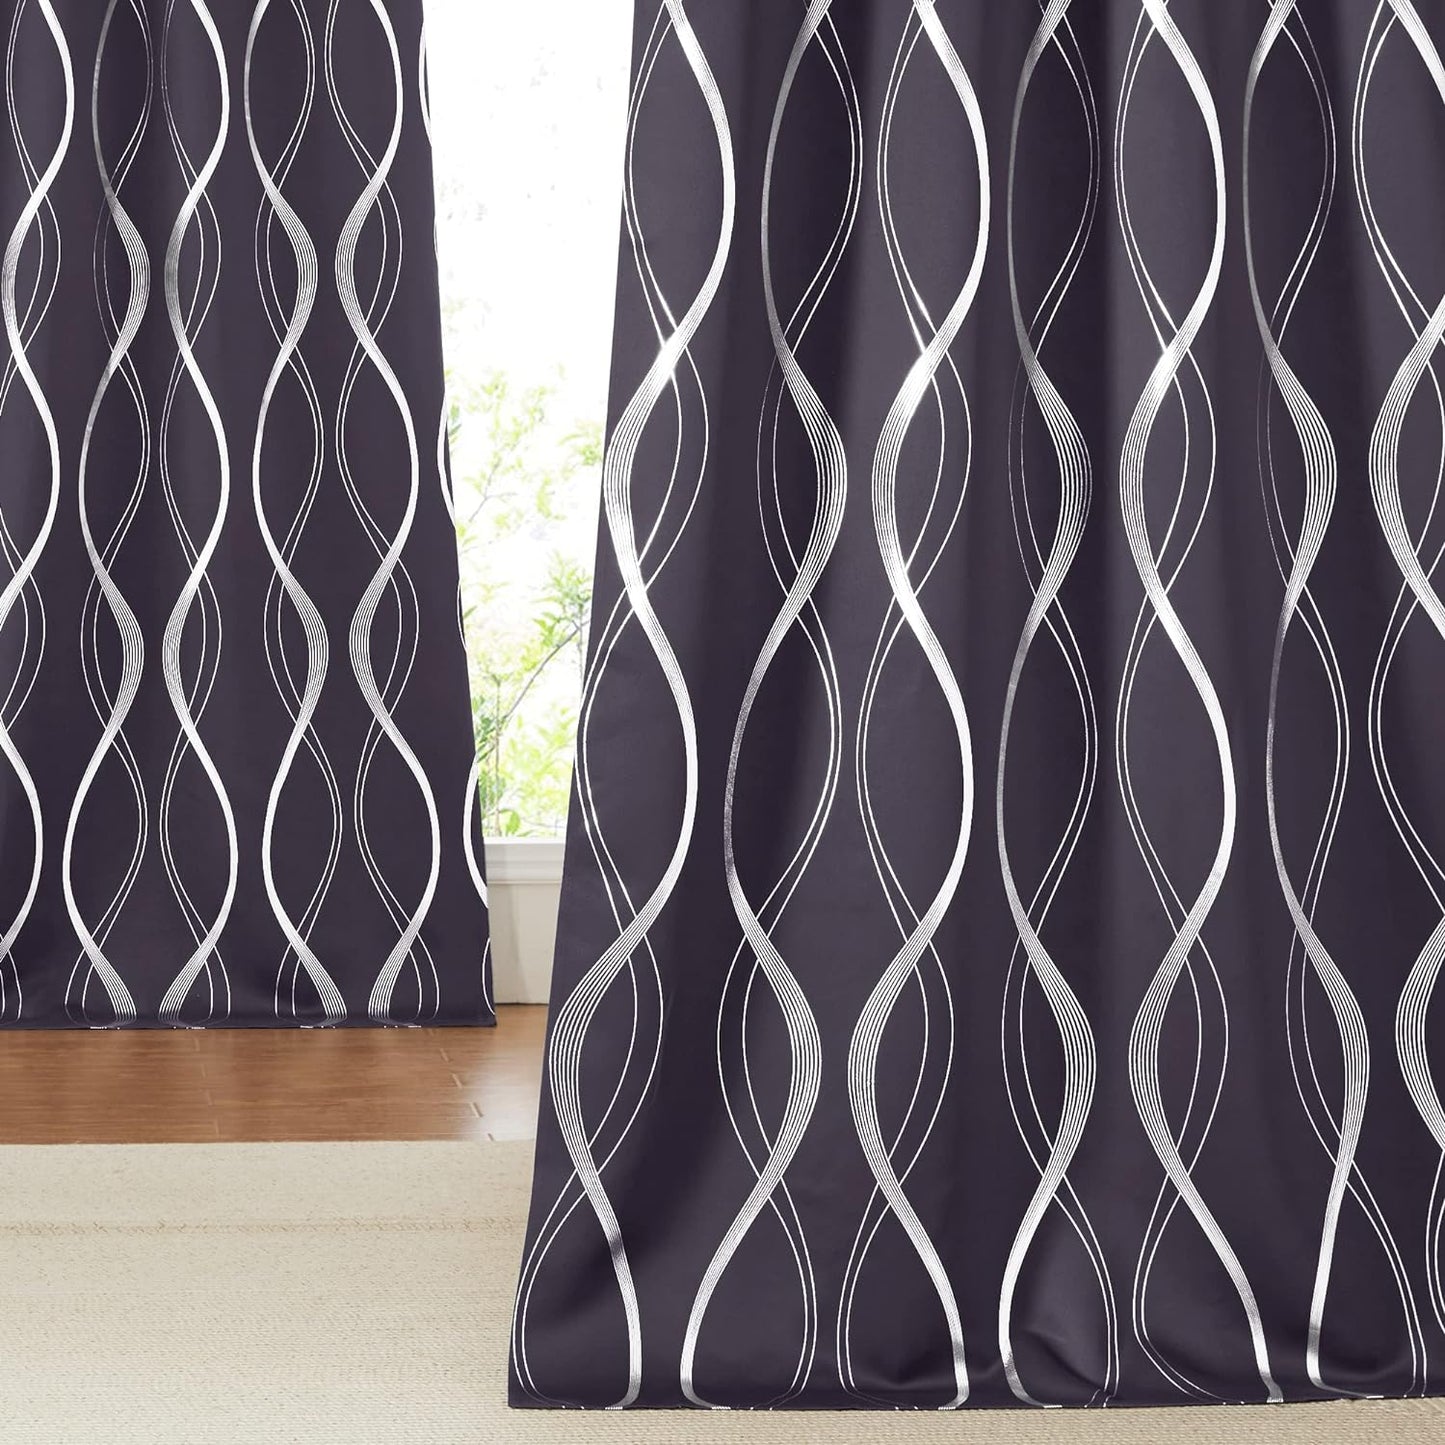 NICETOWN Grey Blackout Curtains 84 Inch Length 2 Panels Set for Bedroom/Living Room, Noise Reducing Thermal Insulated Wave Line Foil Print Drapes for Patio Sliding Glass Door (52 X 84, Gray)  NICETOWN Greyish Purple 52"W X 84"L 